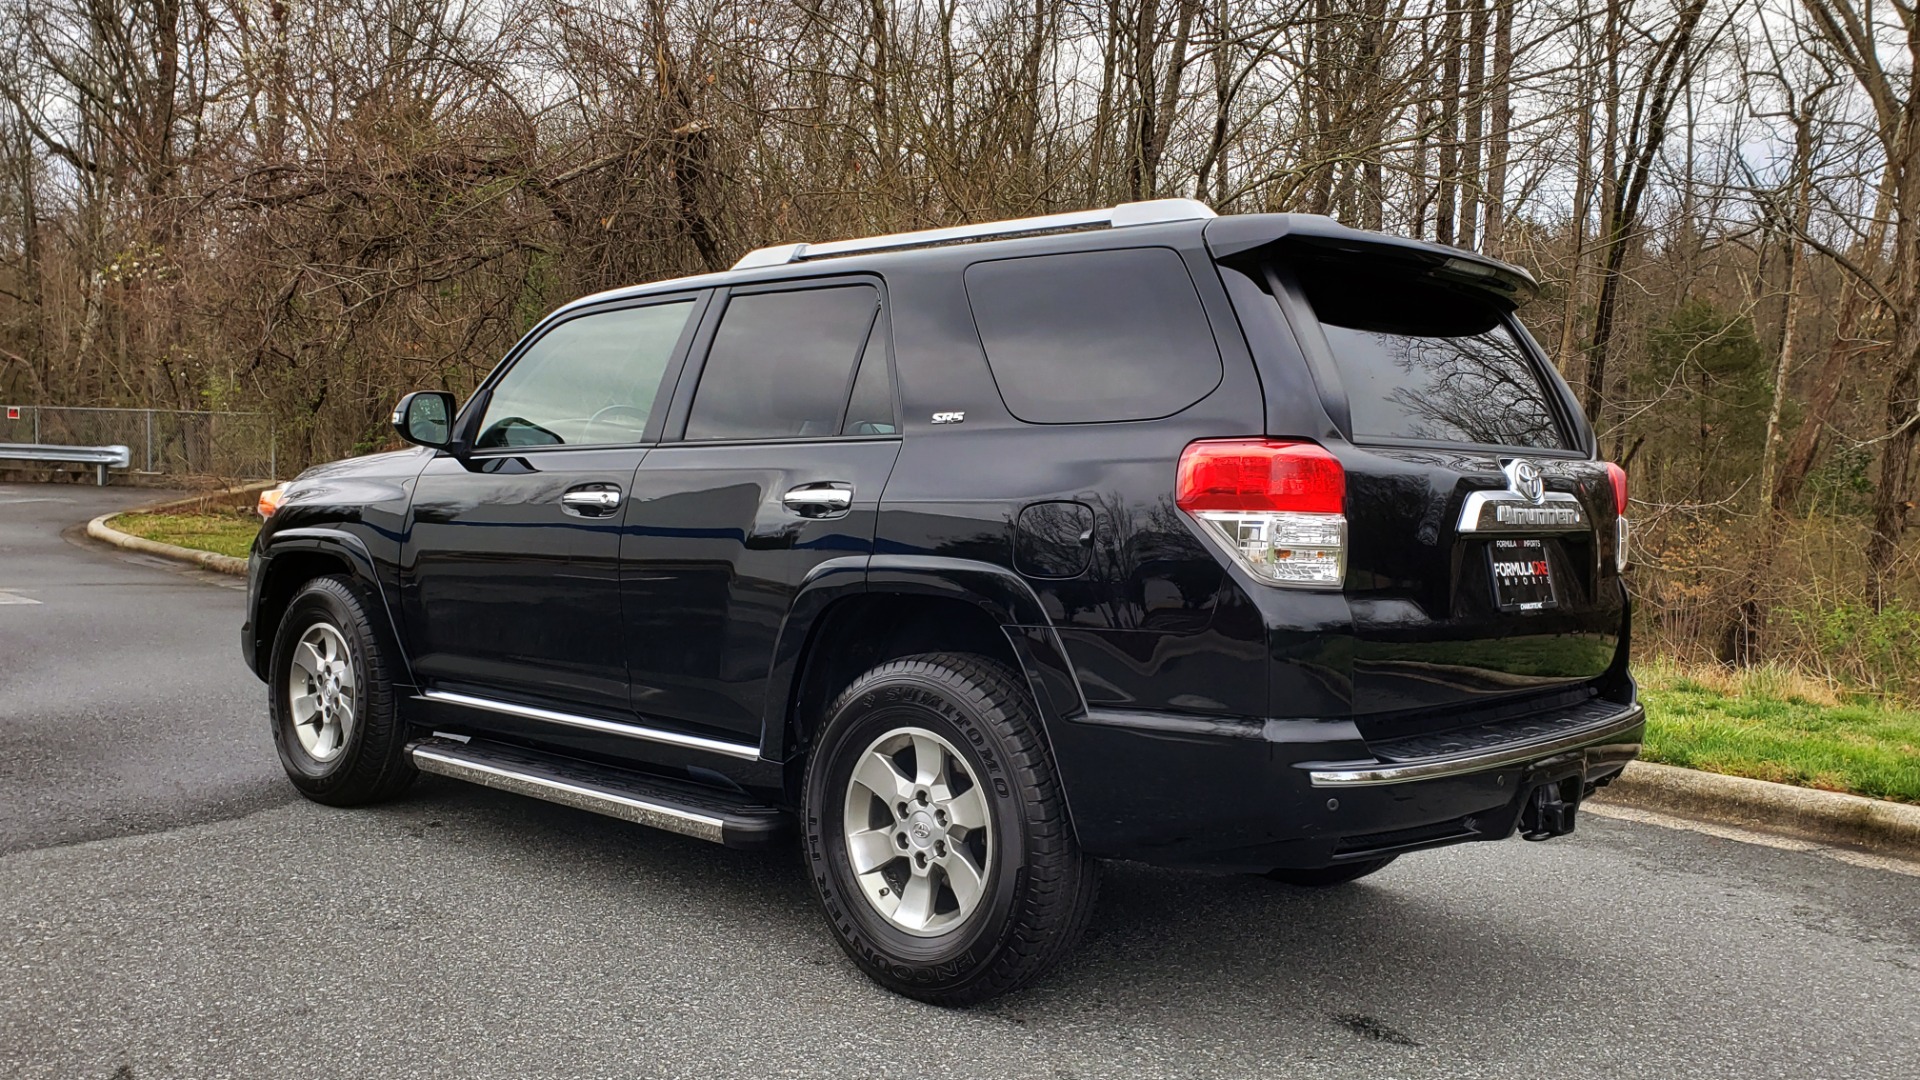 Used 2011 Toyota 4RUNNER SR5 2WD / 5-SPD AUTO / 4.0L V6 / SAT RADIO / PWR STS for sale Sold at Formula Imports in Charlotte NC 28227 3